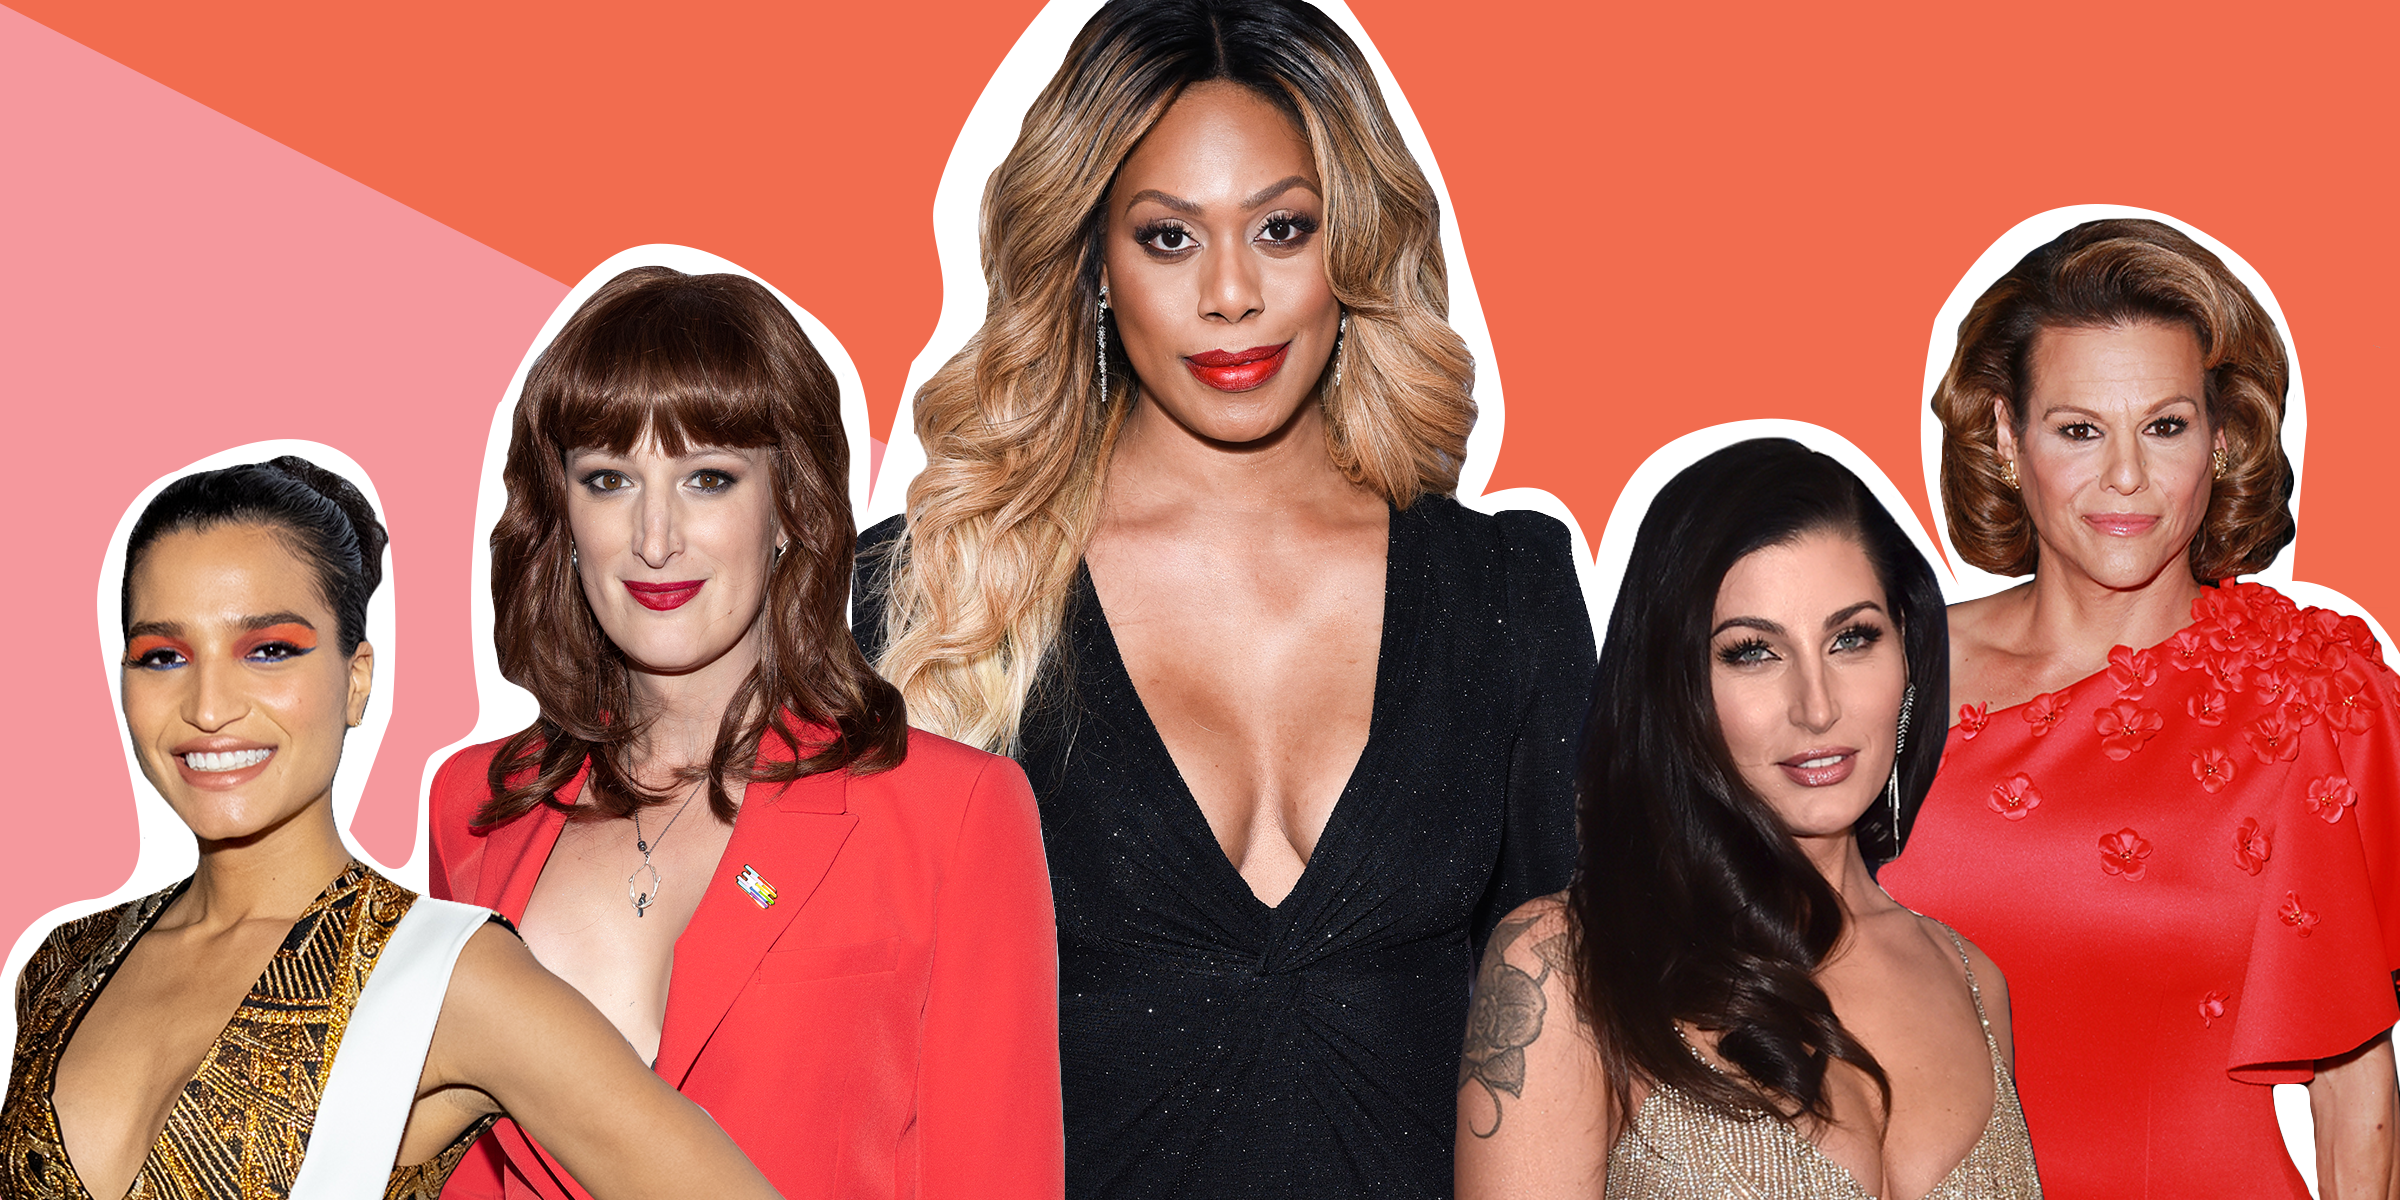 Meet the Trans Women Transforming Television and Beyond